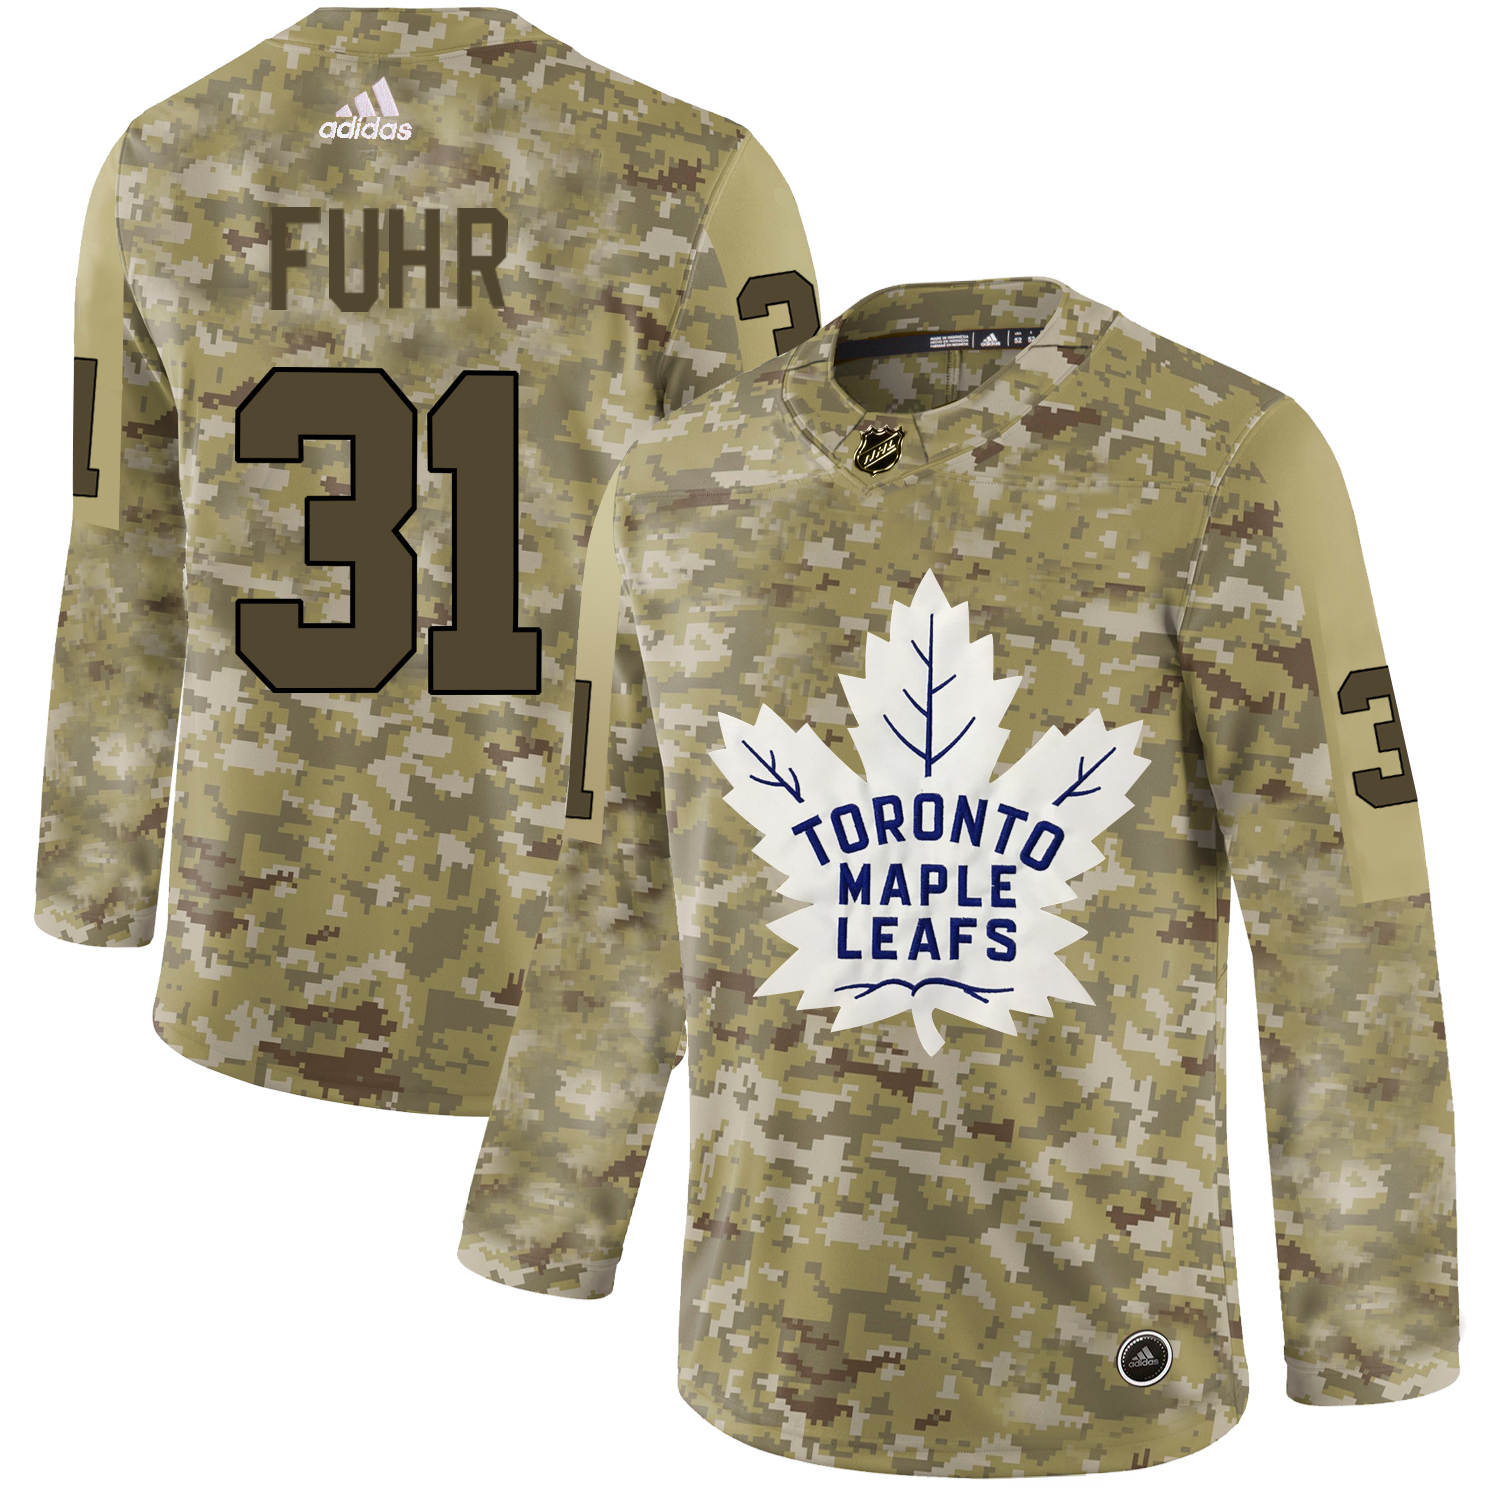 Adidas Maple Leafs #31 Grant Fuhr Camo Authentic Stitched NHL Jersey